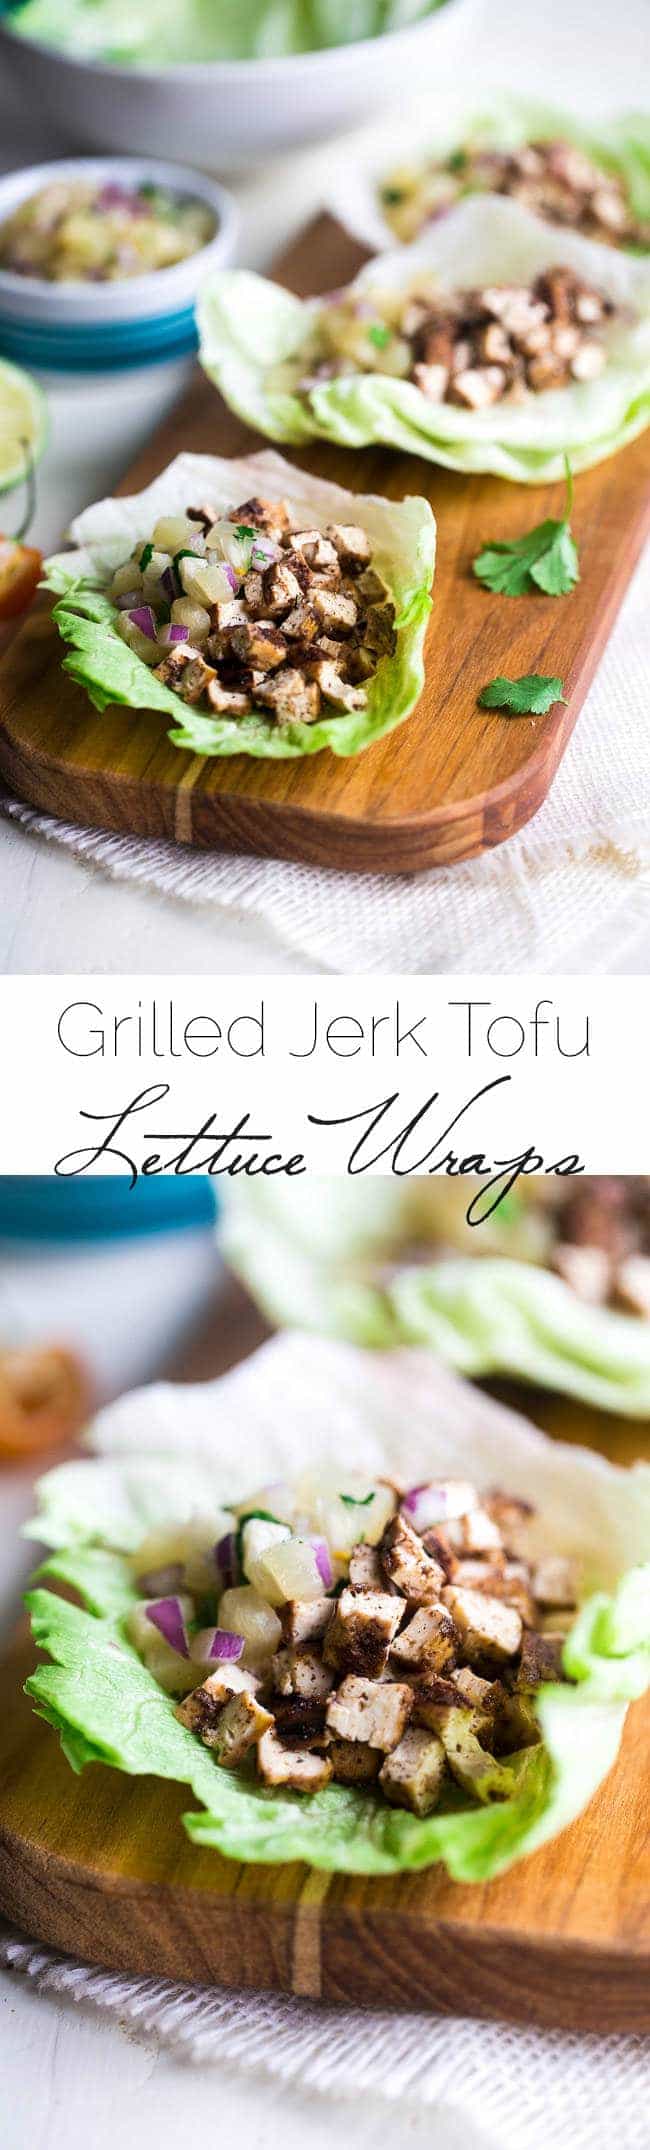 Easy Vegetarian Lettuce Wraps with Jerk Grilled Tofu - These lettuce wraps are piled with spicy-sweet and crispy grilled tofu and pineapple salsa. They're a quick and easy, healthy meal for Summer grilling or Meatless Monday! | #Foodfaithfitness | #Tofu #Vegan #Glutenfree #Vegetarian #Healthy